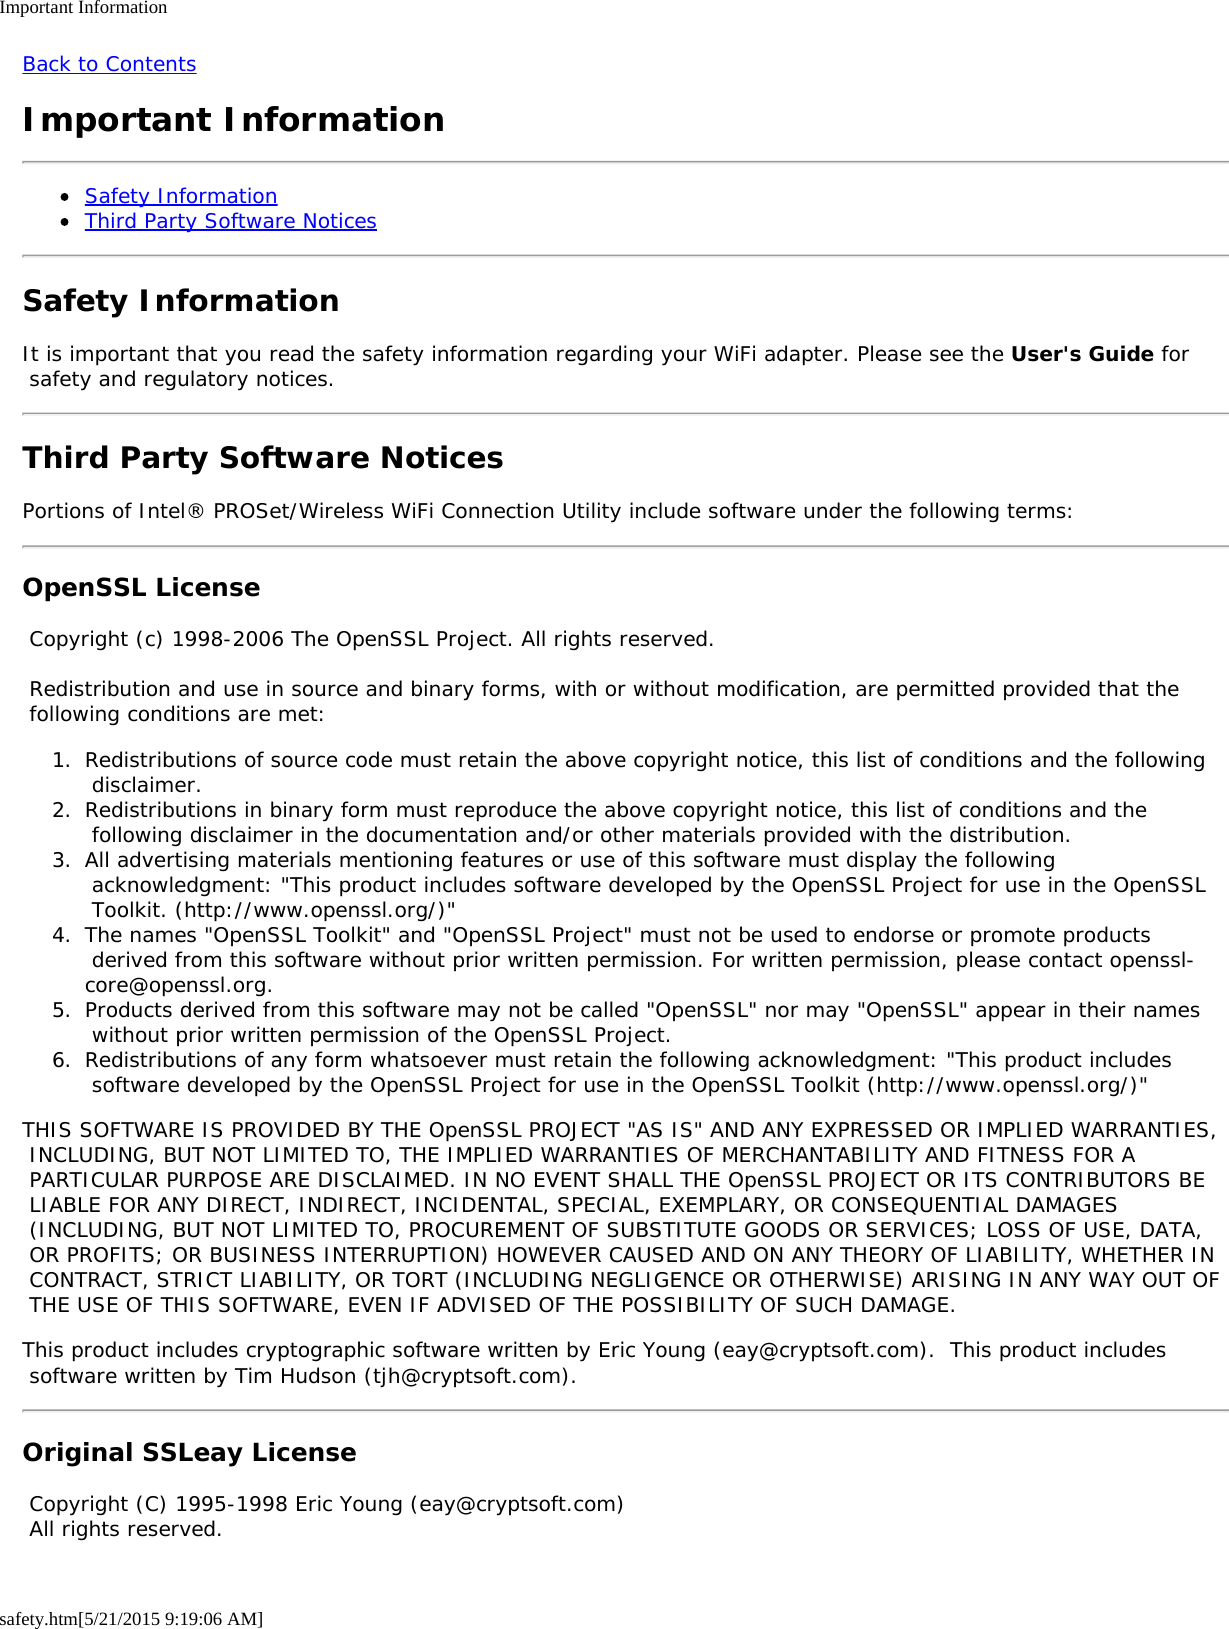 Important Informationsafety.htm[5/21/2015 9:19:06 AM]Back to ContentsImportant InformationSafety InformationThird Party Software NoticesSafety InformationIt is important that you read the safety information regarding your WiFi adapter. Please see the User&apos;s Guide for safety and regulatory notices.Third Party Software NoticesPortions of Intel® PROSet/Wireless WiFi Connection Utility include software under the following terms:OpenSSL License Copyright (c) 1998-2006 The OpenSSL Project. All rights reserved. Redistribution and use in source and binary forms, with or without modification, are permitted provided that the following conditions are met:1.  Redistributions of source code must retain the above copyright notice, this list of conditions and the following disclaimer.2.  Redistributions in binary form must reproduce the above copyright notice, this list of conditions and the following disclaimer in the documentation and/or other materials provided with the distribution.3.  All advertising materials mentioning features or use of this software must display the following acknowledgment: &quot;This product includes software developed by the OpenSSL Project for use in the OpenSSL Toolkit. (http://www.openssl.org/)&quot;4.  The names &quot;OpenSSL Toolkit&quot; and &quot;OpenSSL Project&quot; must not be used to endorse or promote products derived from this software without prior written permission. For written permission, please contact openssl-core@openssl.org.5.  Products derived from this software may not be called &quot;OpenSSL&quot; nor may &quot;OpenSSL&quot; appear in their names without prior written permission of the OpenSSL Project.6.  Redistributions of any form whatsoever must retain the following acknowledgment: &quot;This product includes software developed by the OpenSSL Project for use in the OpenSSL Toolkit (http://www.openssl.org/)&quot;THIS SOFTWARE IS PROVIDED BY THE OpenSSL PROJECT &quot;AS IS&quot; AND ANY EXPRESSED OR IMPLIED WARRANTIES, INCLUDING, BUT NOT LIMITED TO, THE IMPLIED WARRANTIES OF MERCHANTABILITY AND FITNESS FOR A PARTICULAR PURPOSE ARE DISCLAIMED. IN NO EVENT SHALL THE OpenSSL PROJECT OR ITS CONTRIBUTORS BE LIABLE FOR ANY DIRECT, INDIRECT, INCIDENTAL, SPECIAL, EXEMPLARY, OR CONSEQUENTIAL DAMAGES (INCLUDING, BUT NOT LIMITED TO, PROCUREMENT OF SUBSTITUTE GOODS OR SERVICES; LOSS OF USE, DATA, OR PROFITS; OR BUSINESS INTERRUPTION) HOWEVER CAUSED AND ON ANY THEORY OF LIABILITY, WHETHER IN CONTRACT, STRICT LIABILITY, OR TORT (INCLUDING NEGLIGENCE OR OTHERWISE) ARISING IN ANY WAY OUT OF THE USE OF THIS SOFTWARE, EVEN IF ADVISED OF THE POSSIBILITY OF SUCH DAMAGE.This product includes cryptographic software written by Eric Young (eay@cryptsoft.com).  This product includes software written by Tim Hudson (tjh@cryptsoft.com).Original SSLeay License Copyright (C) 1995-1998 Eric Young (eay@cryptsoft.com) All rights reserved.